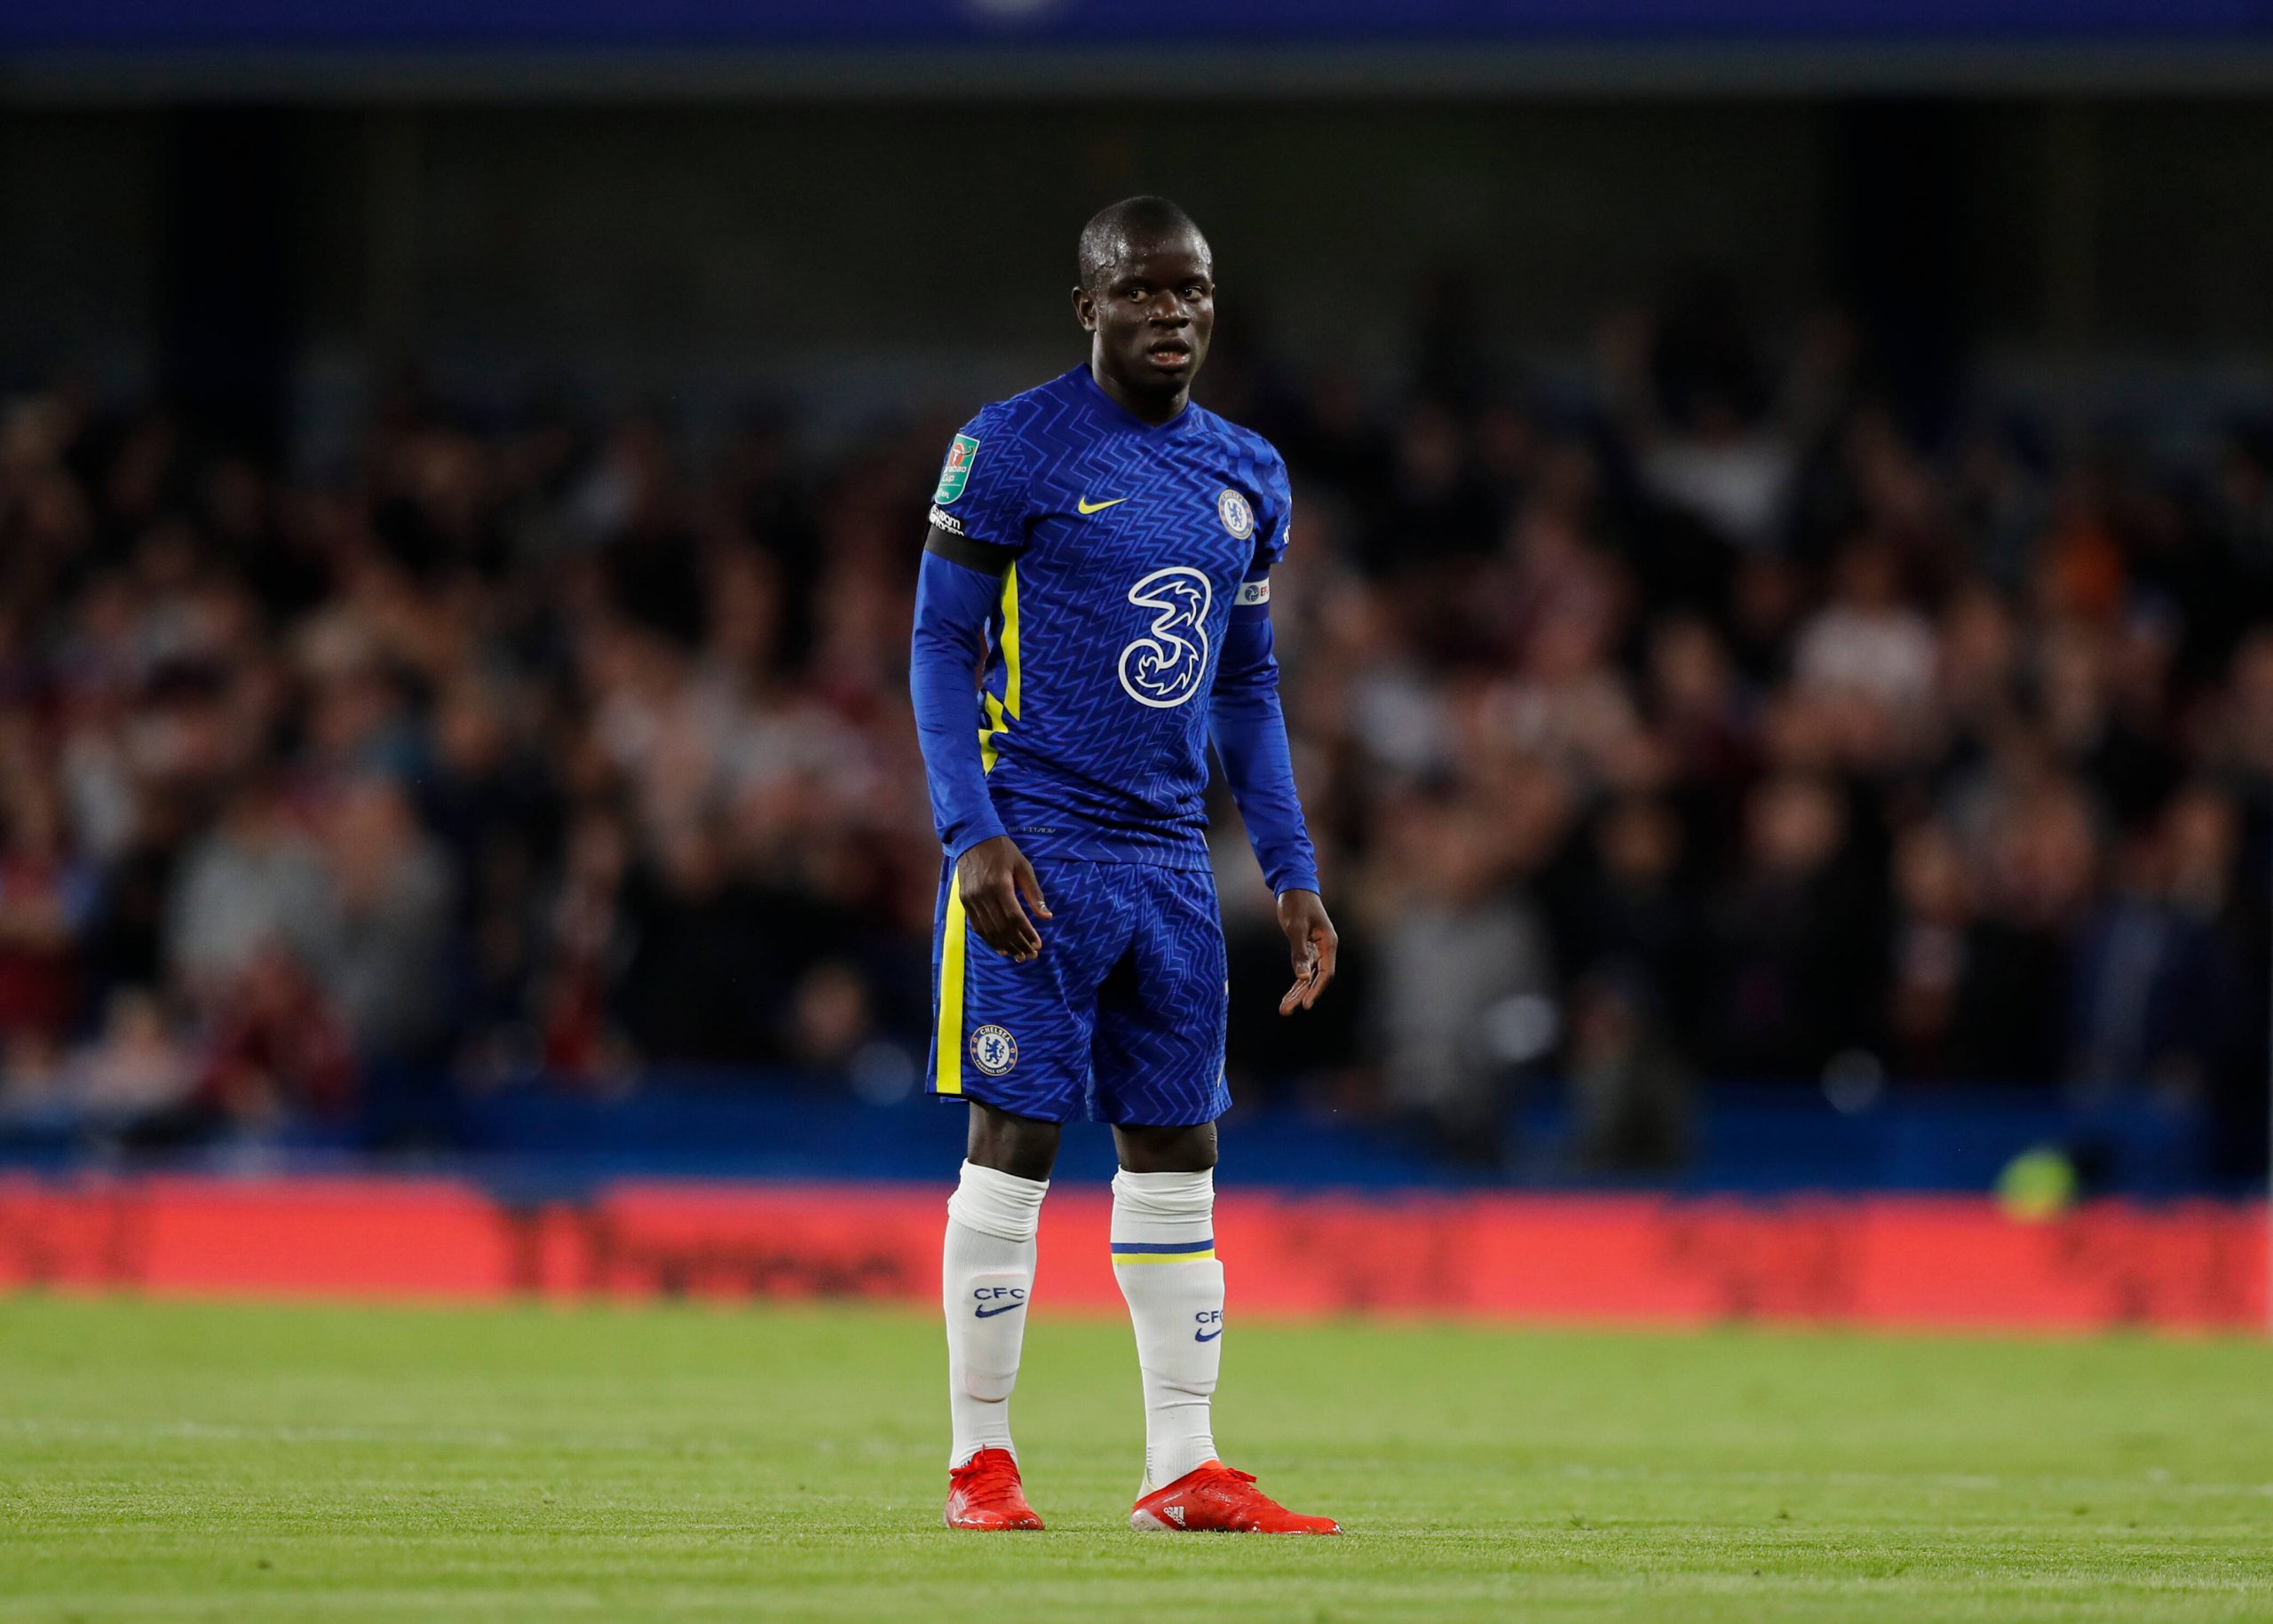 N'Golo Kante tested positive for Covid-19 earlier this season.